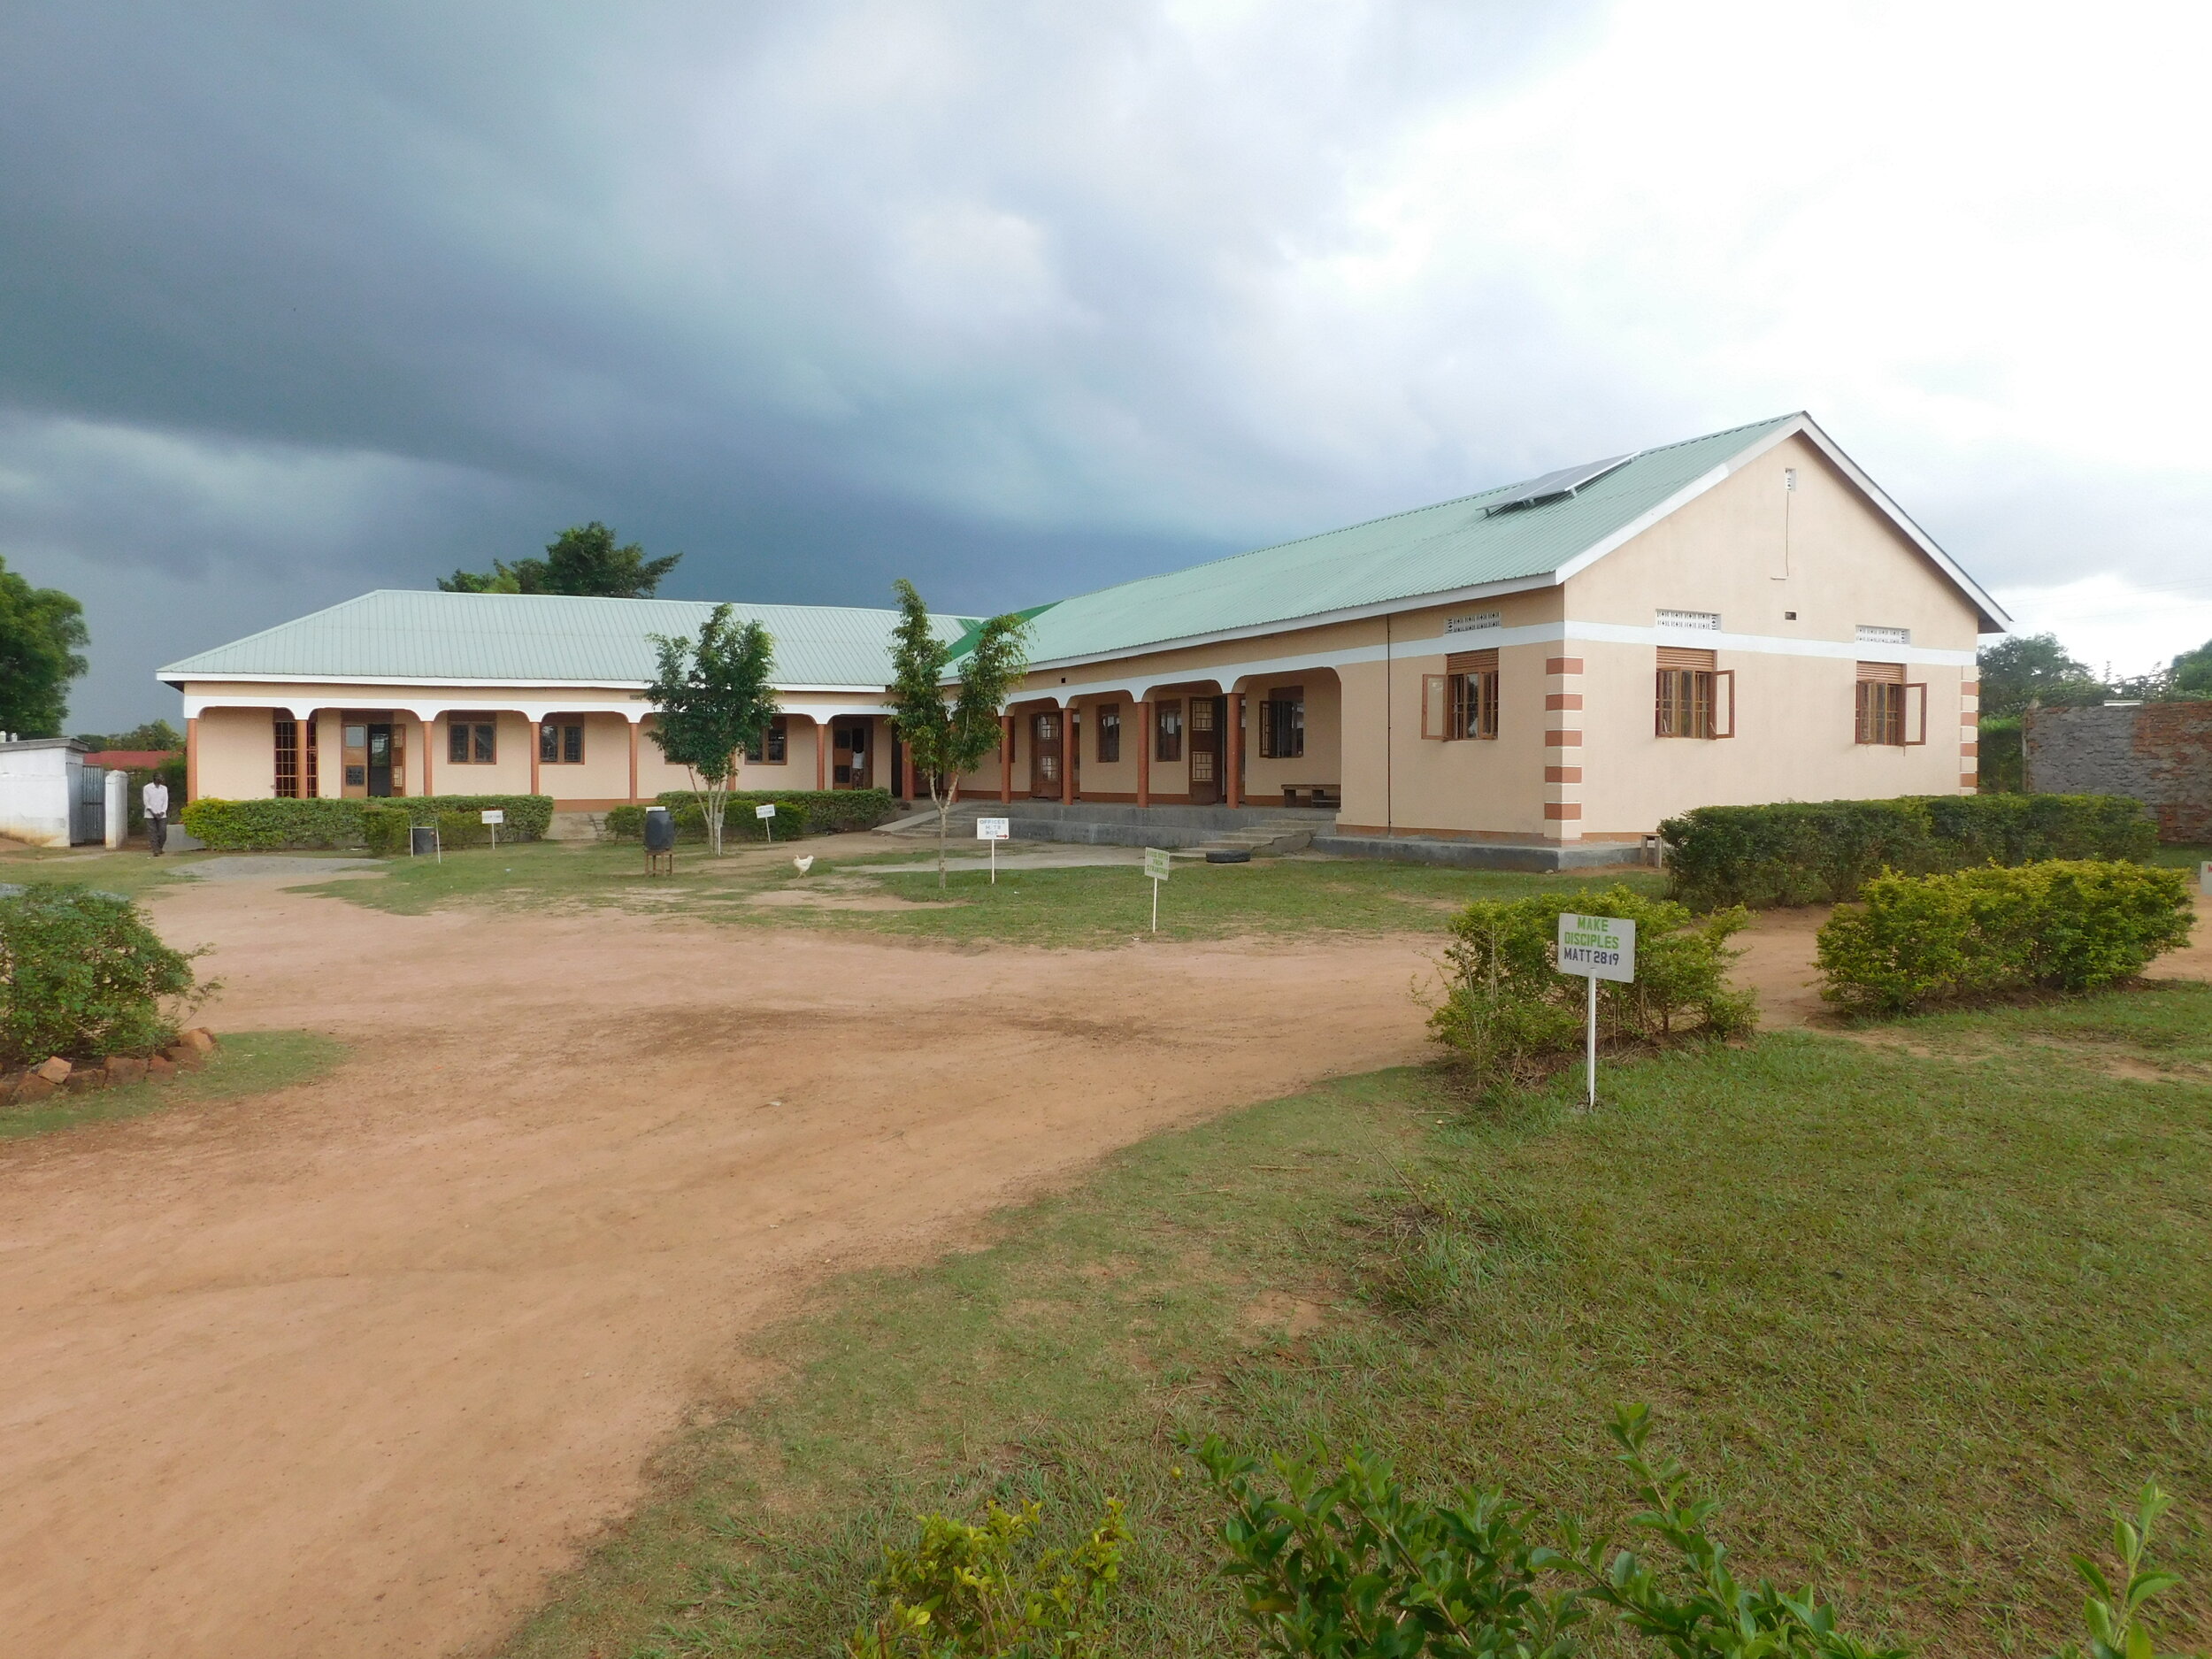 Classrooms and admin block constructed - 2017